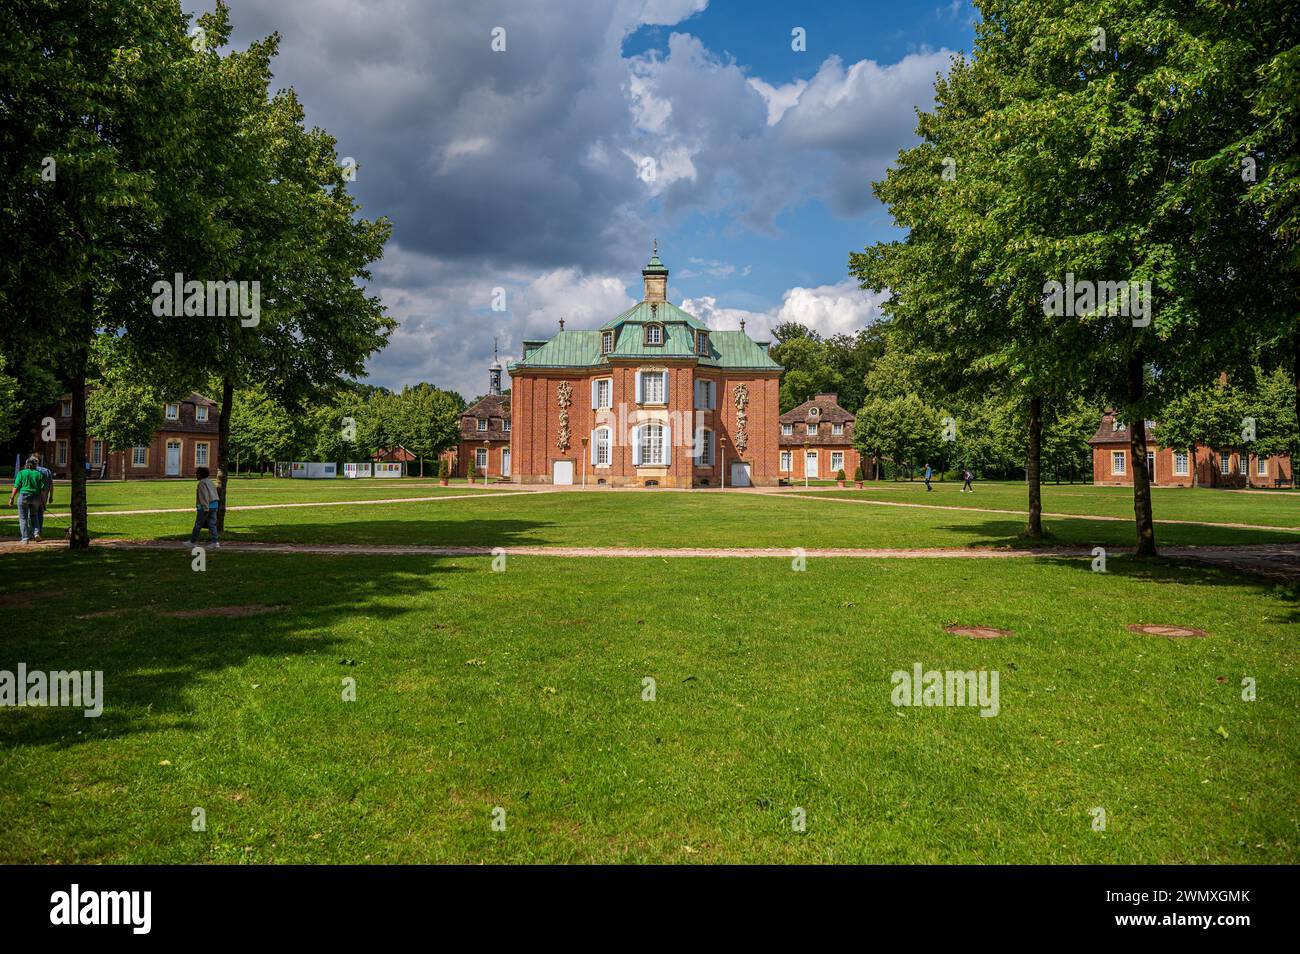 Red castle surrounded by lawns and a cloudy blue sky, Clemenswerth Castle, Soegel, Lower Saxony Stock Photo